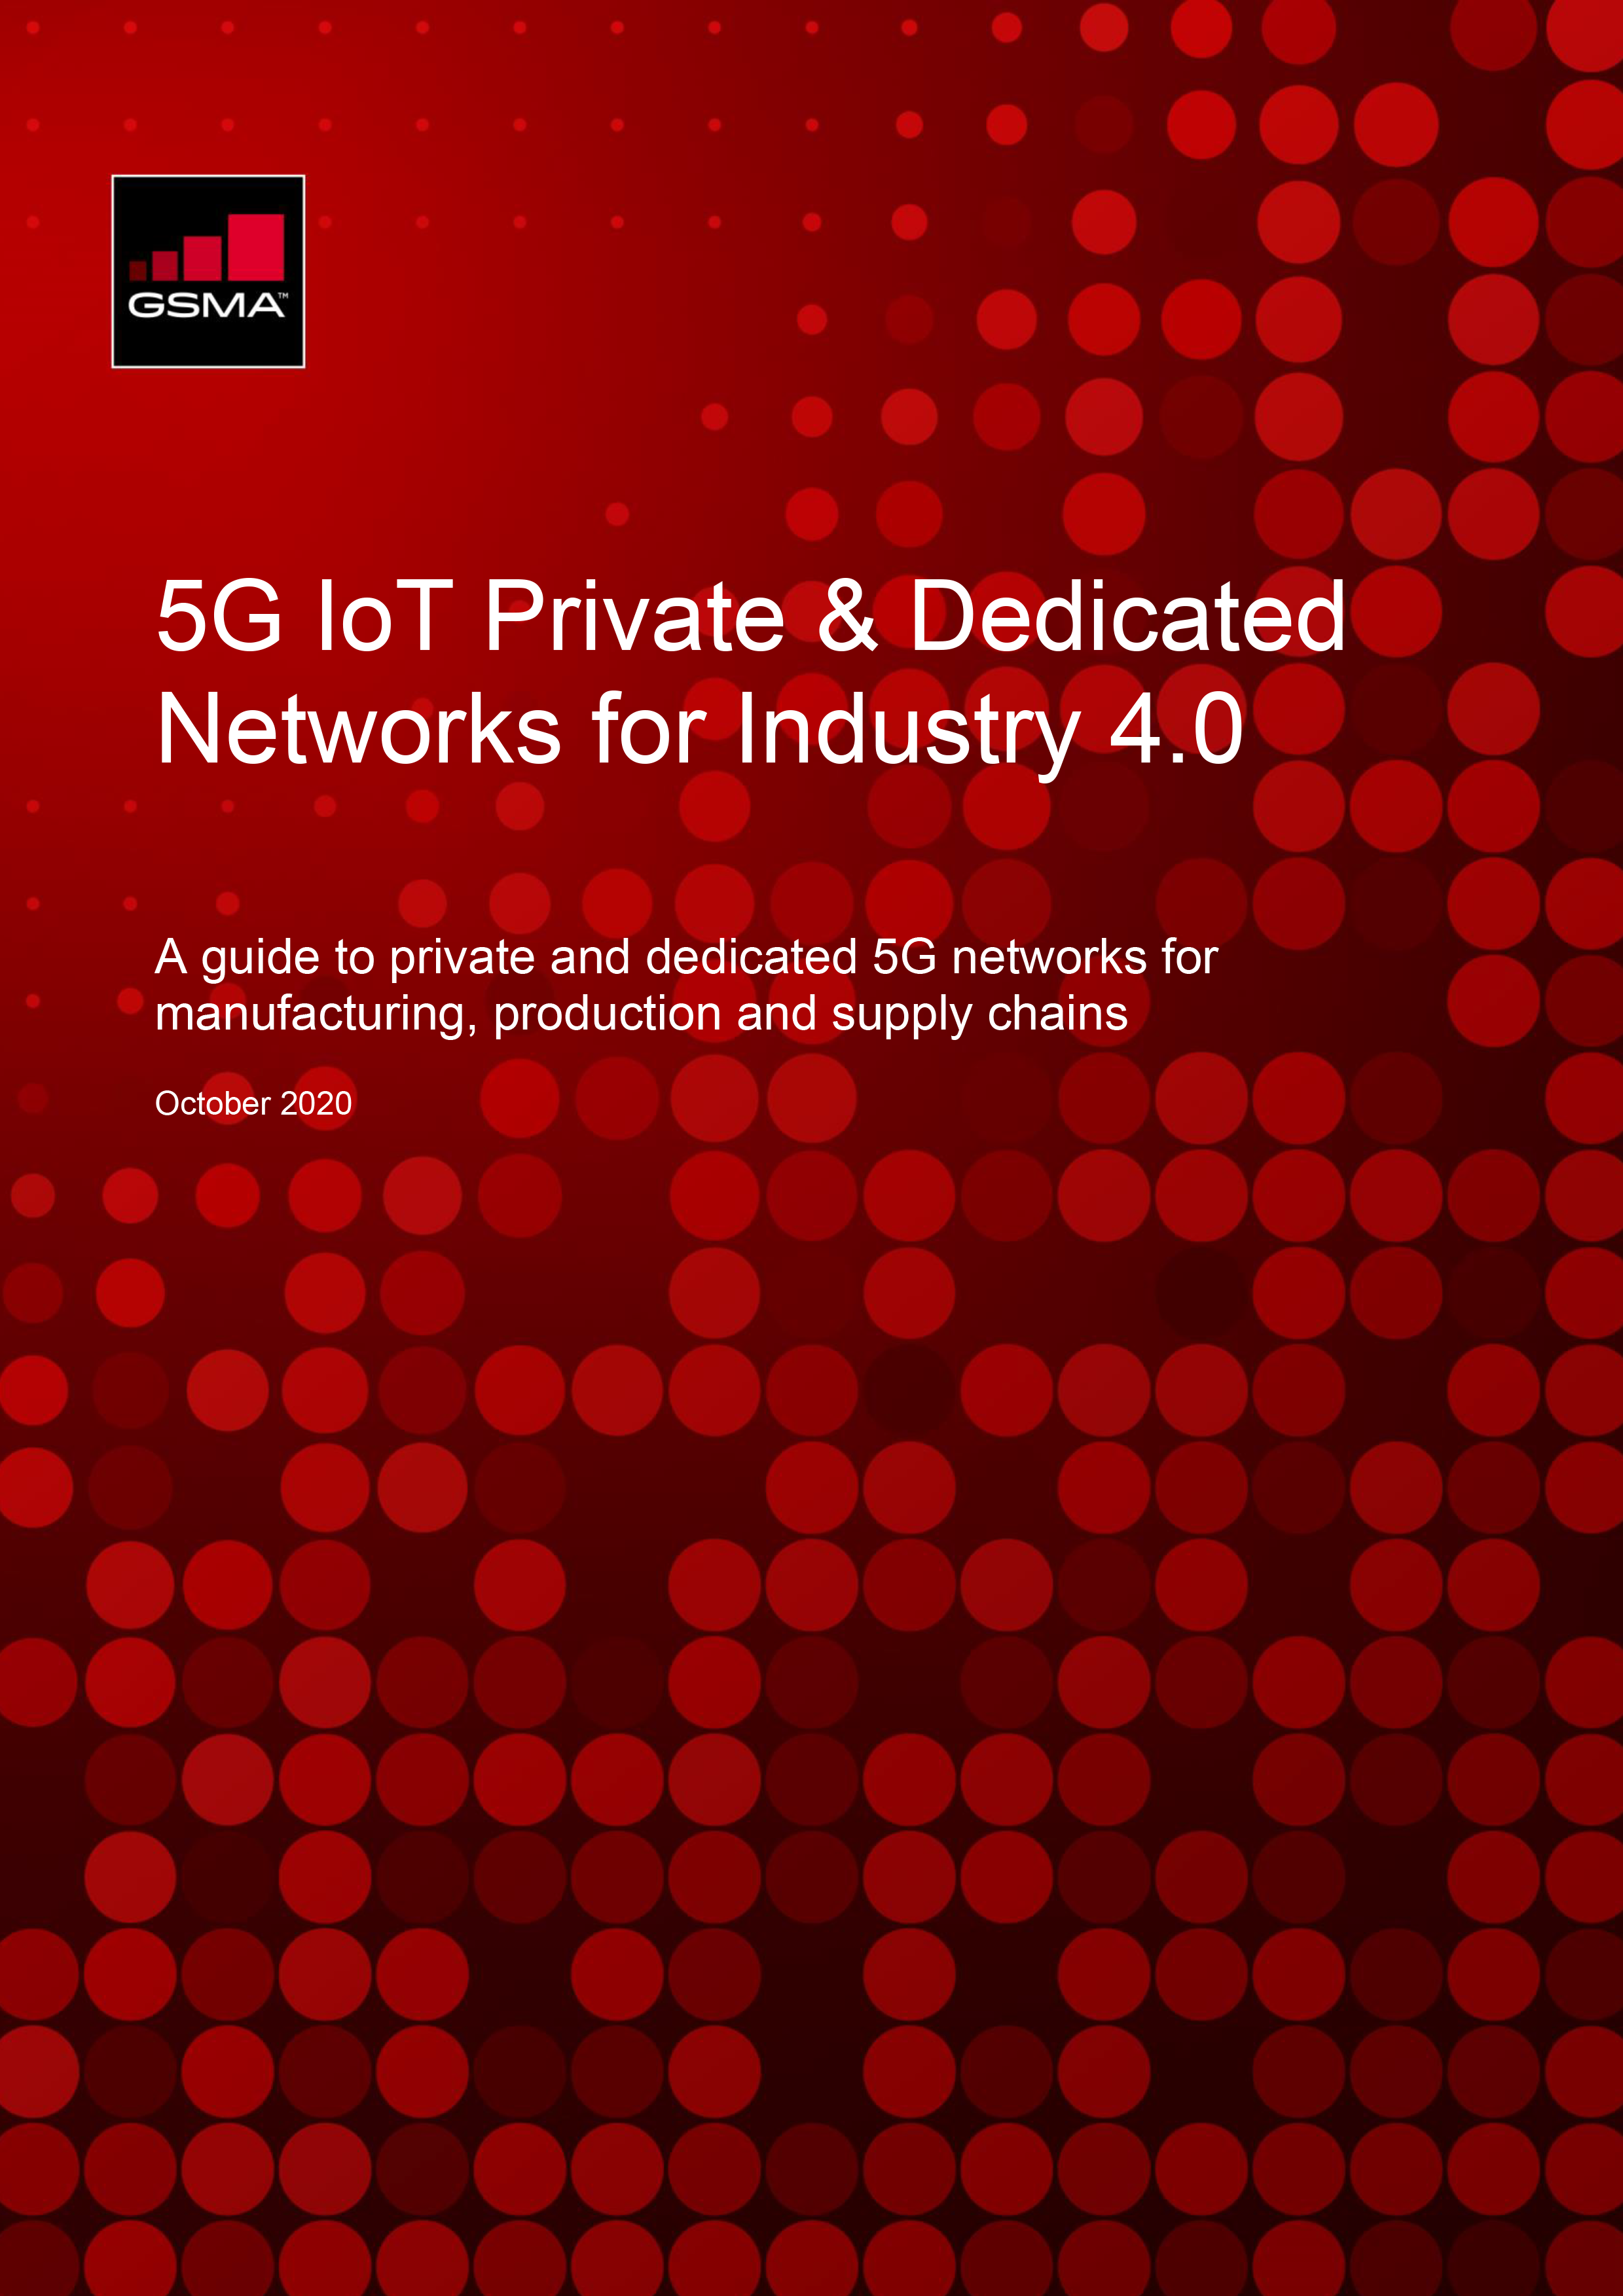 5G Private & Dedicated Networks for Industry 4.0 image